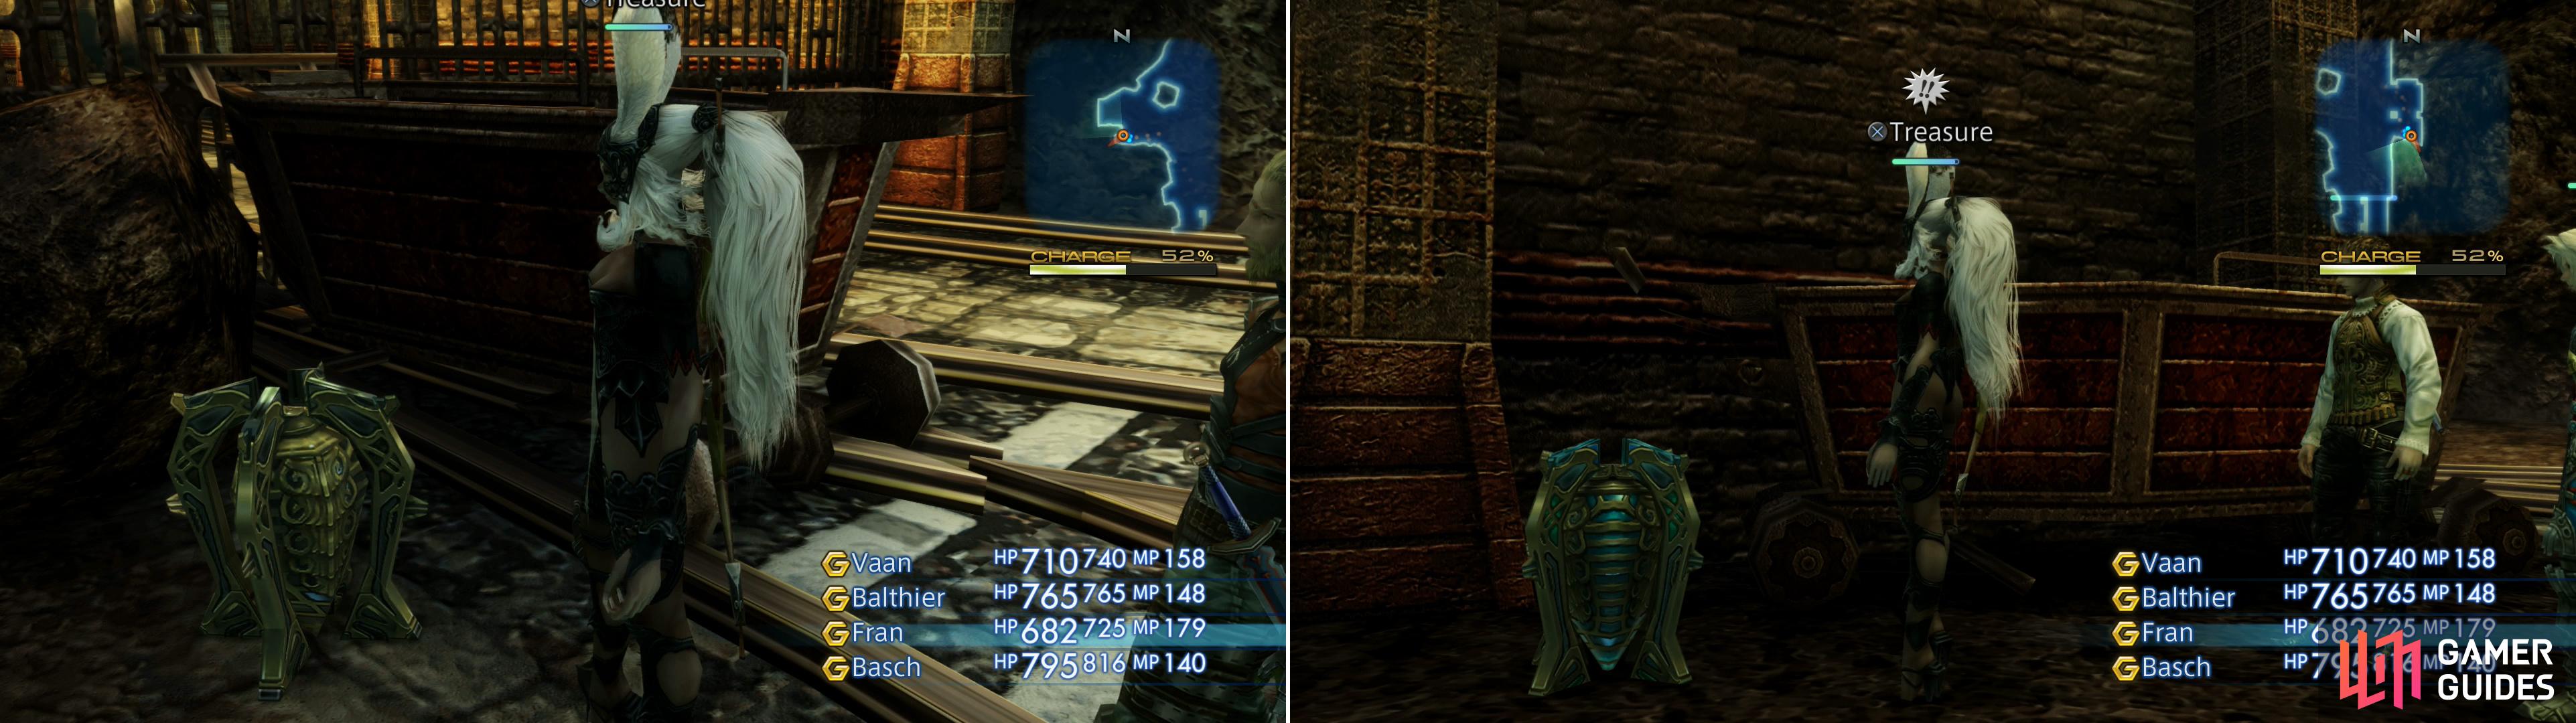 Normal, treasure-containing chests are bland (left) while Mimics posing as chests are distinctively more colorful (right).